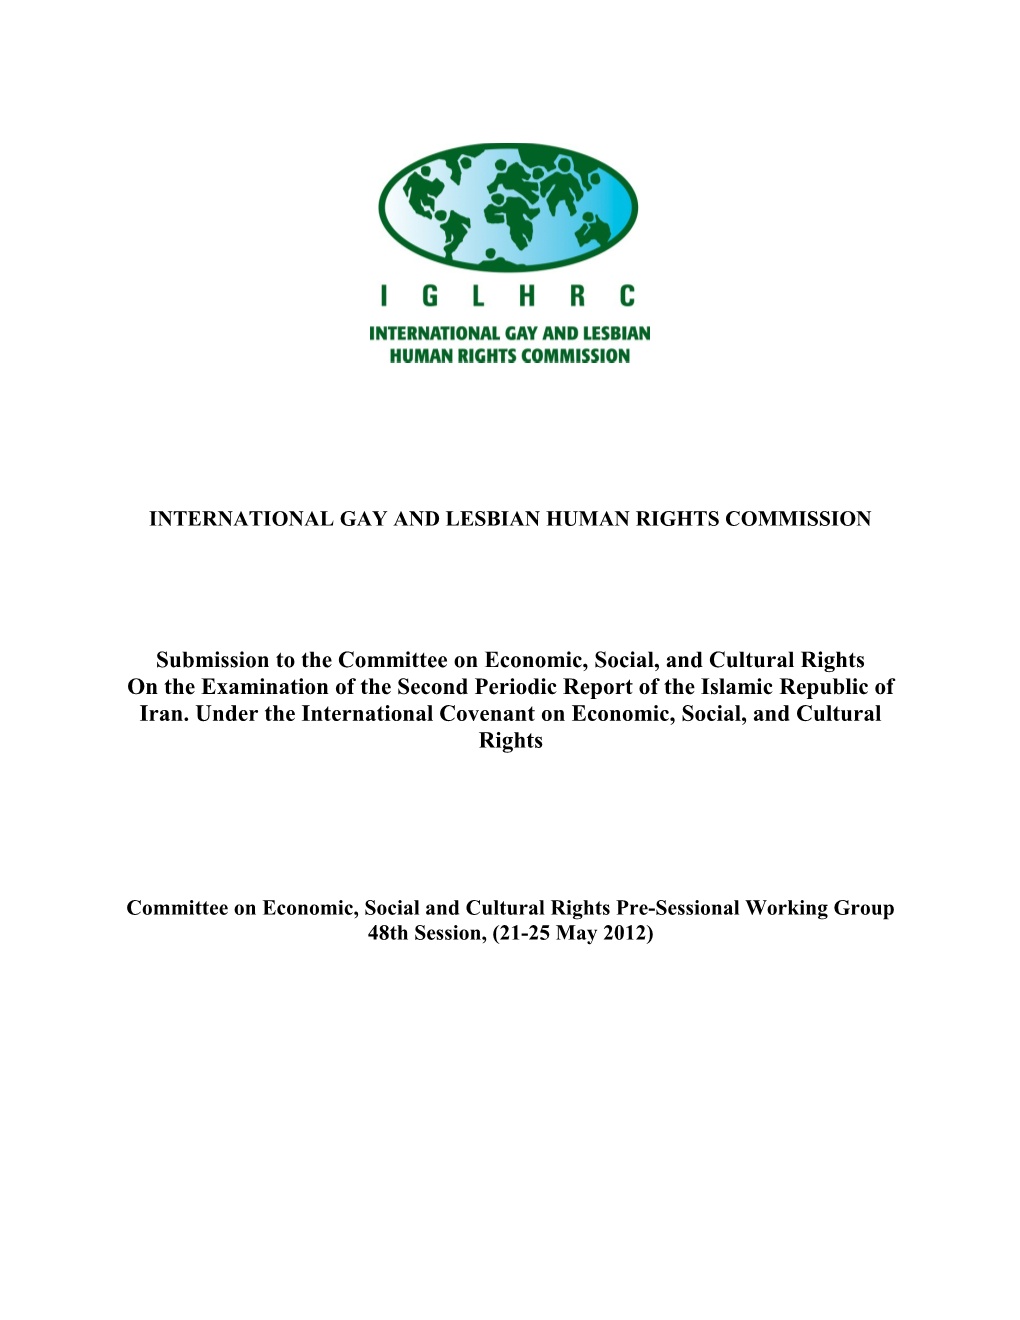 International Gay and Lesbian Human Rights Commission